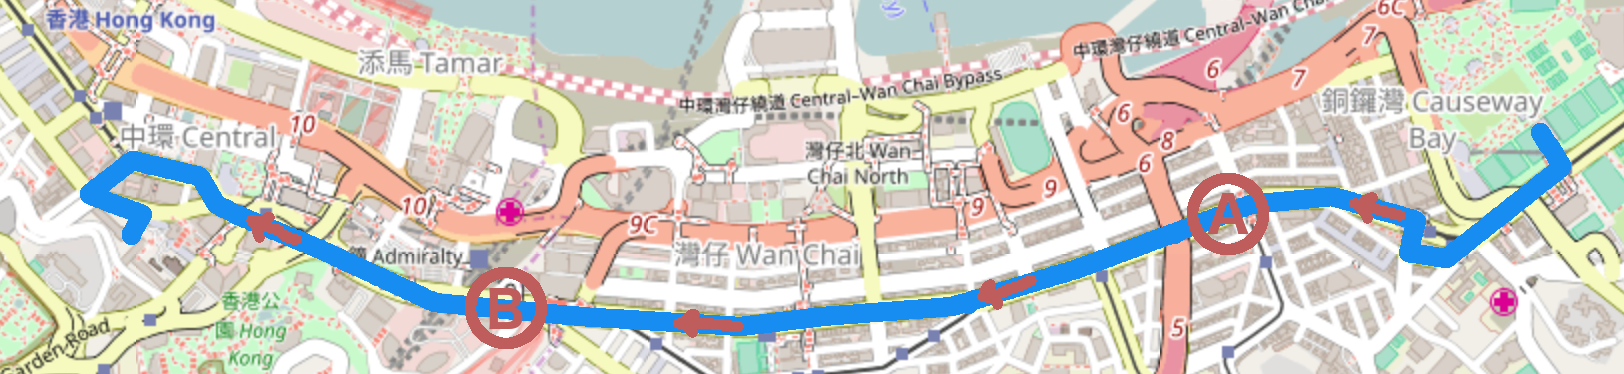 Route of the 1st of July 2006 demonstration in Hong Kong. The two points A and B indicate the location of the two counting points. Courtesy goes to Open Street Map.